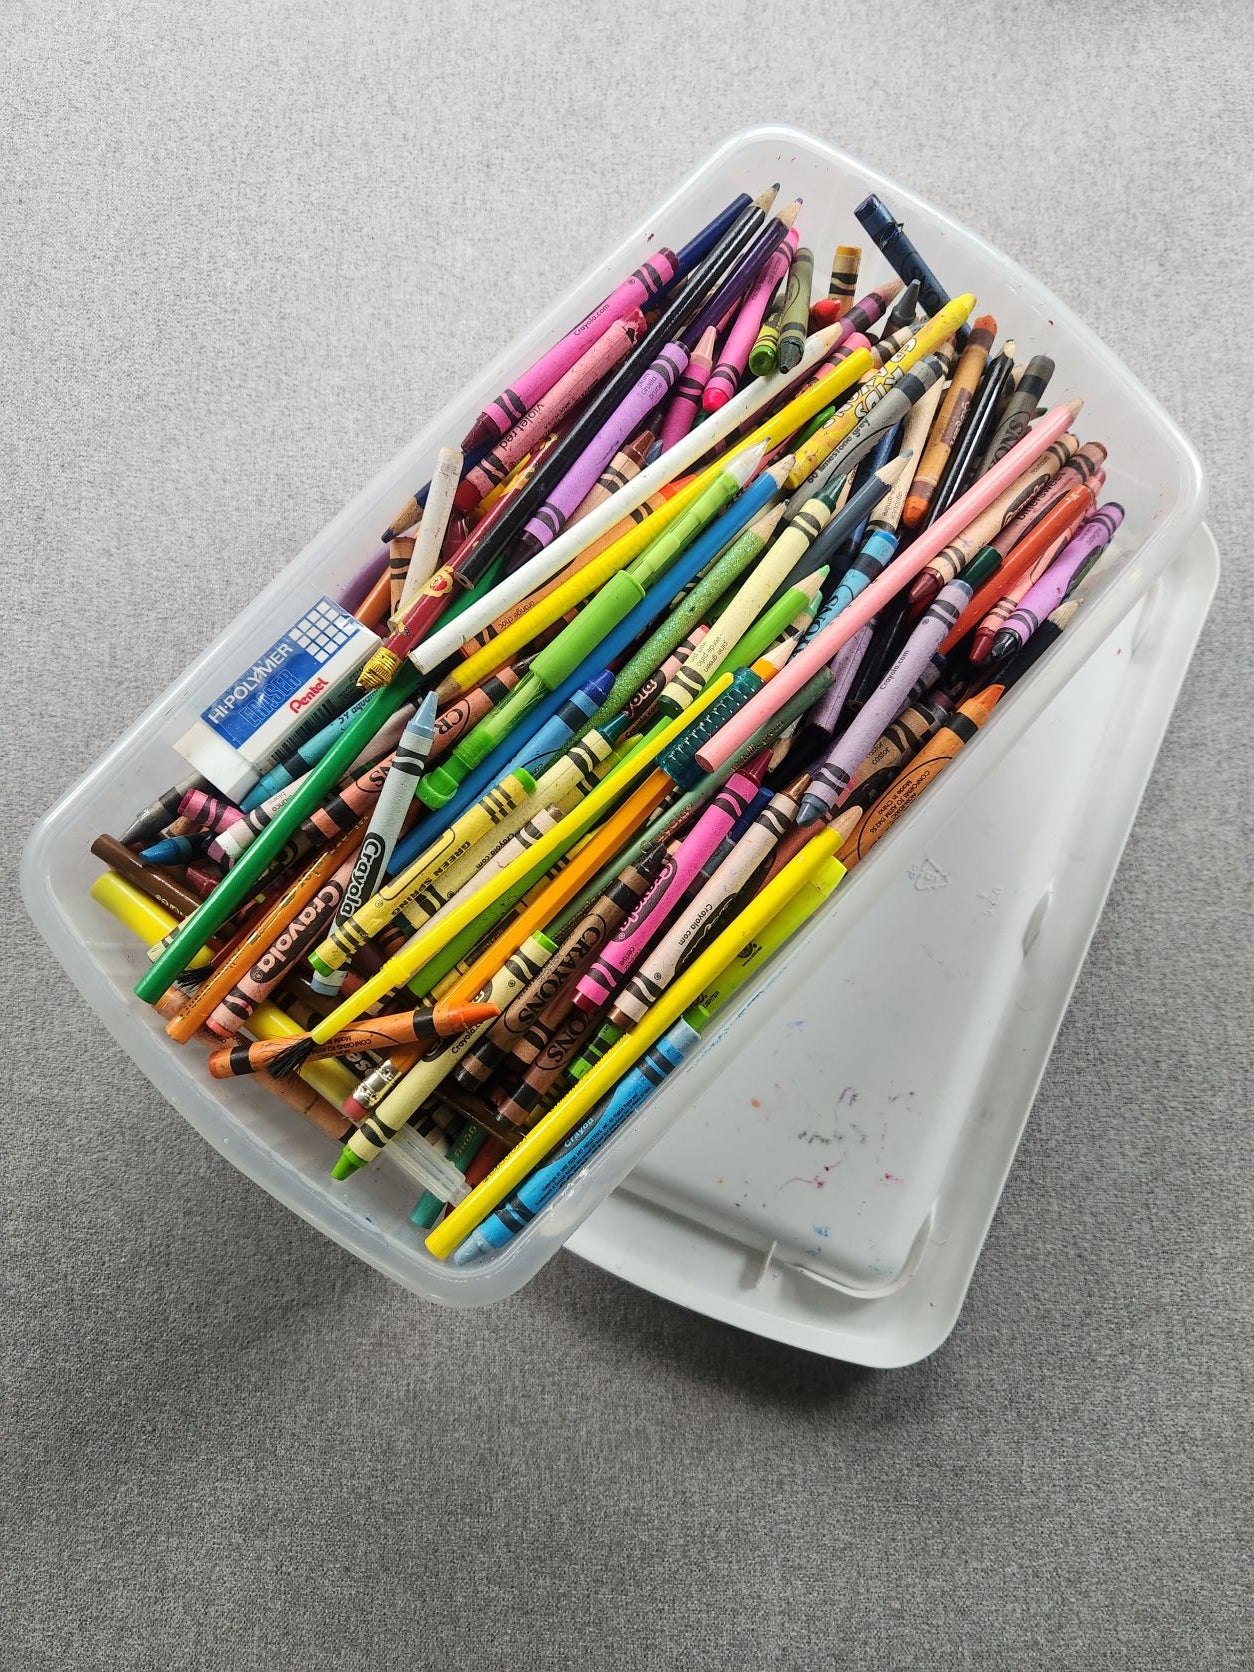 Quick Tip for Organizing Crayons, Markers, and Coloring Books